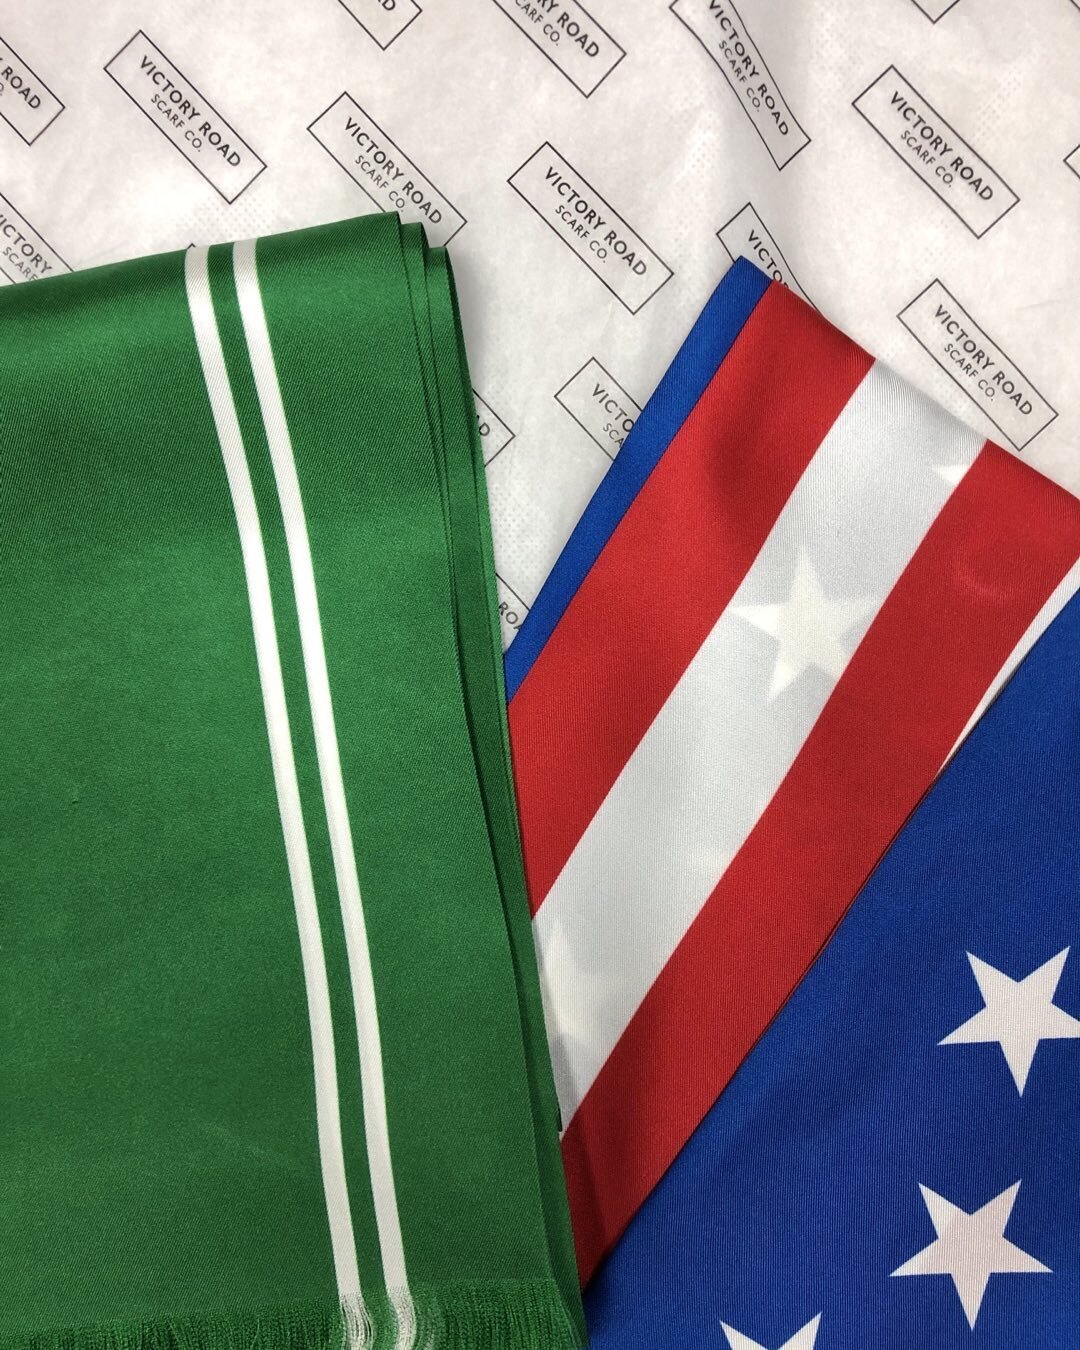 Really looking forward to the game tomorrow against USA rugby 🏉 at the Aviva stadium Dublin.Best of luck 🍀 to all the squad and special congratulations to all the New Caps.
#rugby#irfu#usarugby#dublin#avivans#scarf#supporters#fashion#shoplocal#supp